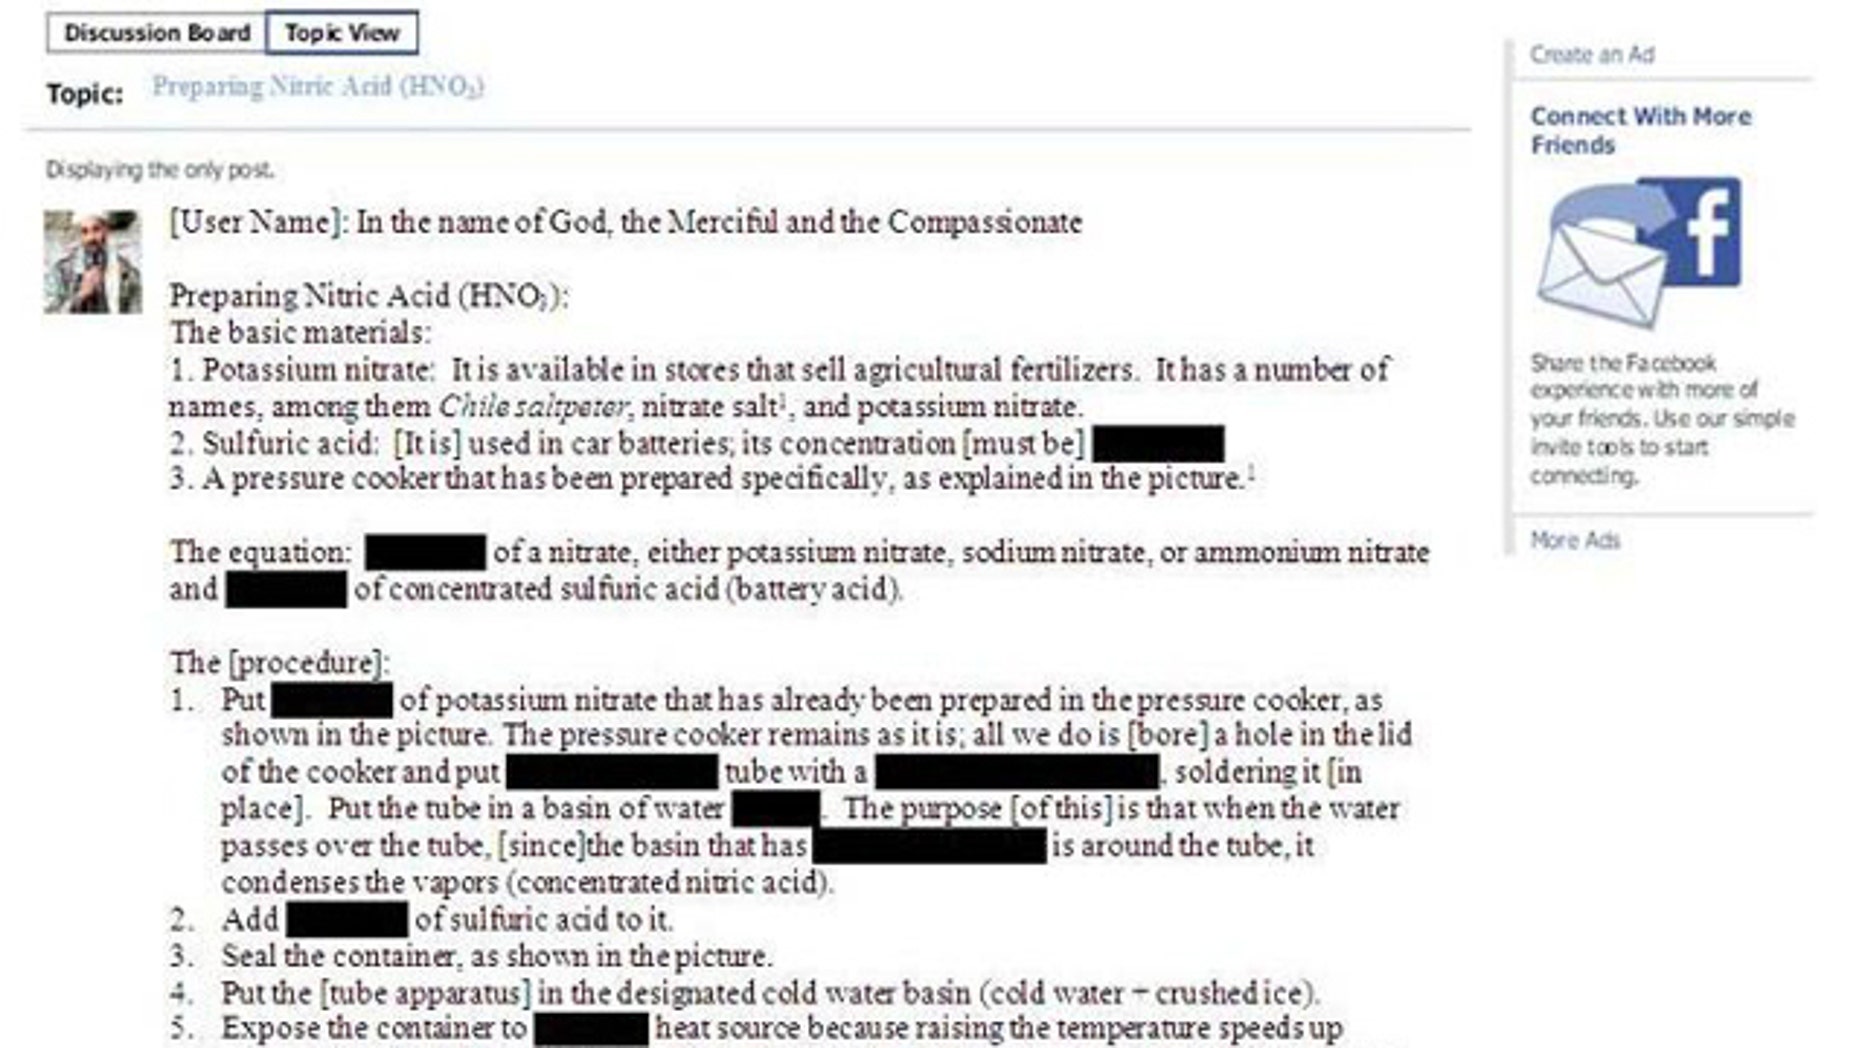 This Facebook page, which appears in the DHS report, shows a recipe for preparing nitric acid, an ingredient used to make bombs